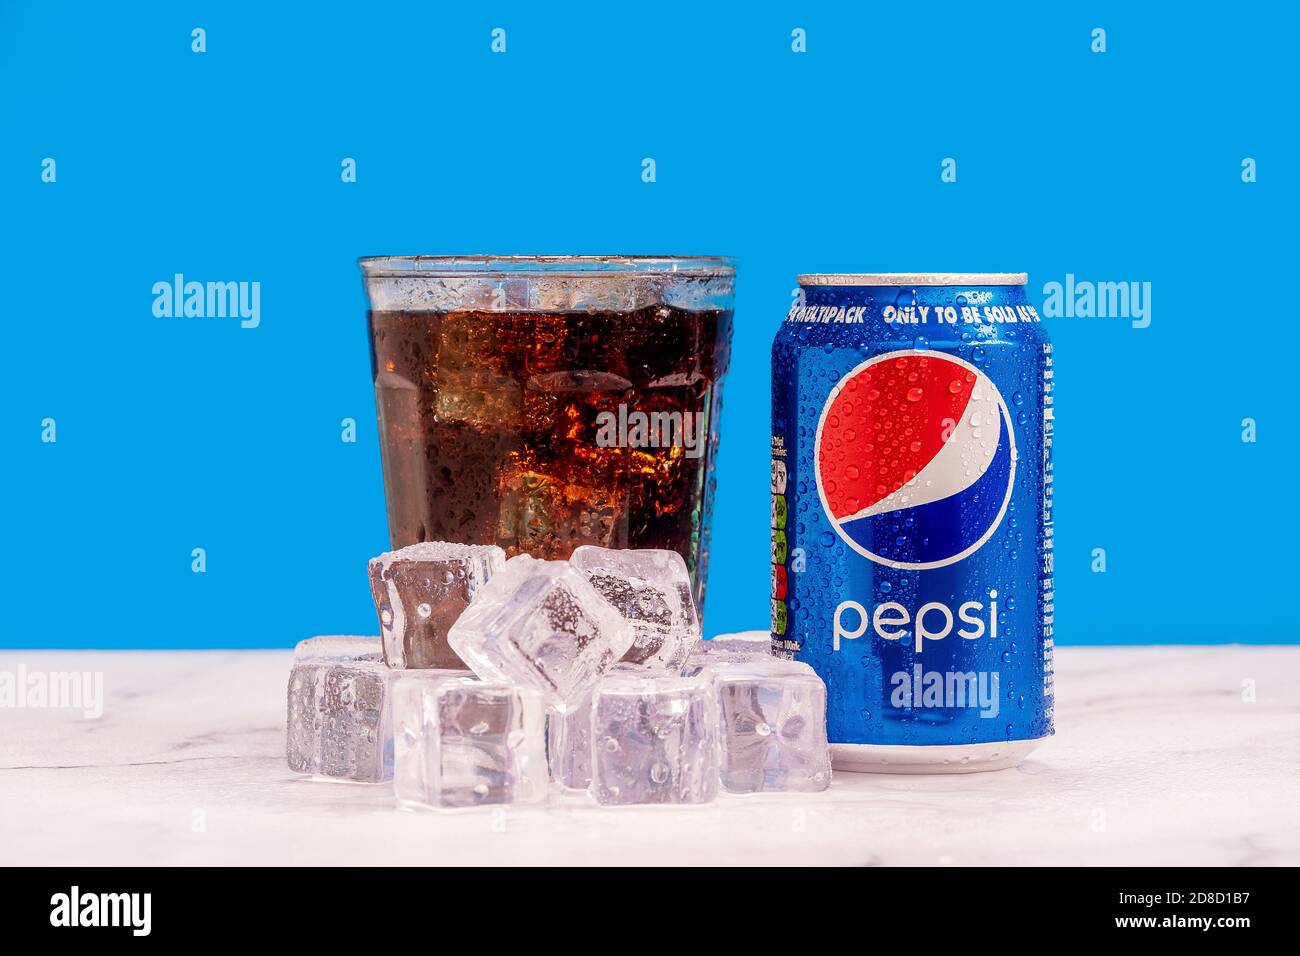 London, United Kingdom - October 29 2020:  Ice cold can of Pepsi next to a full glass of soda with ice cubes and condensation on a blue background. Stock Photo